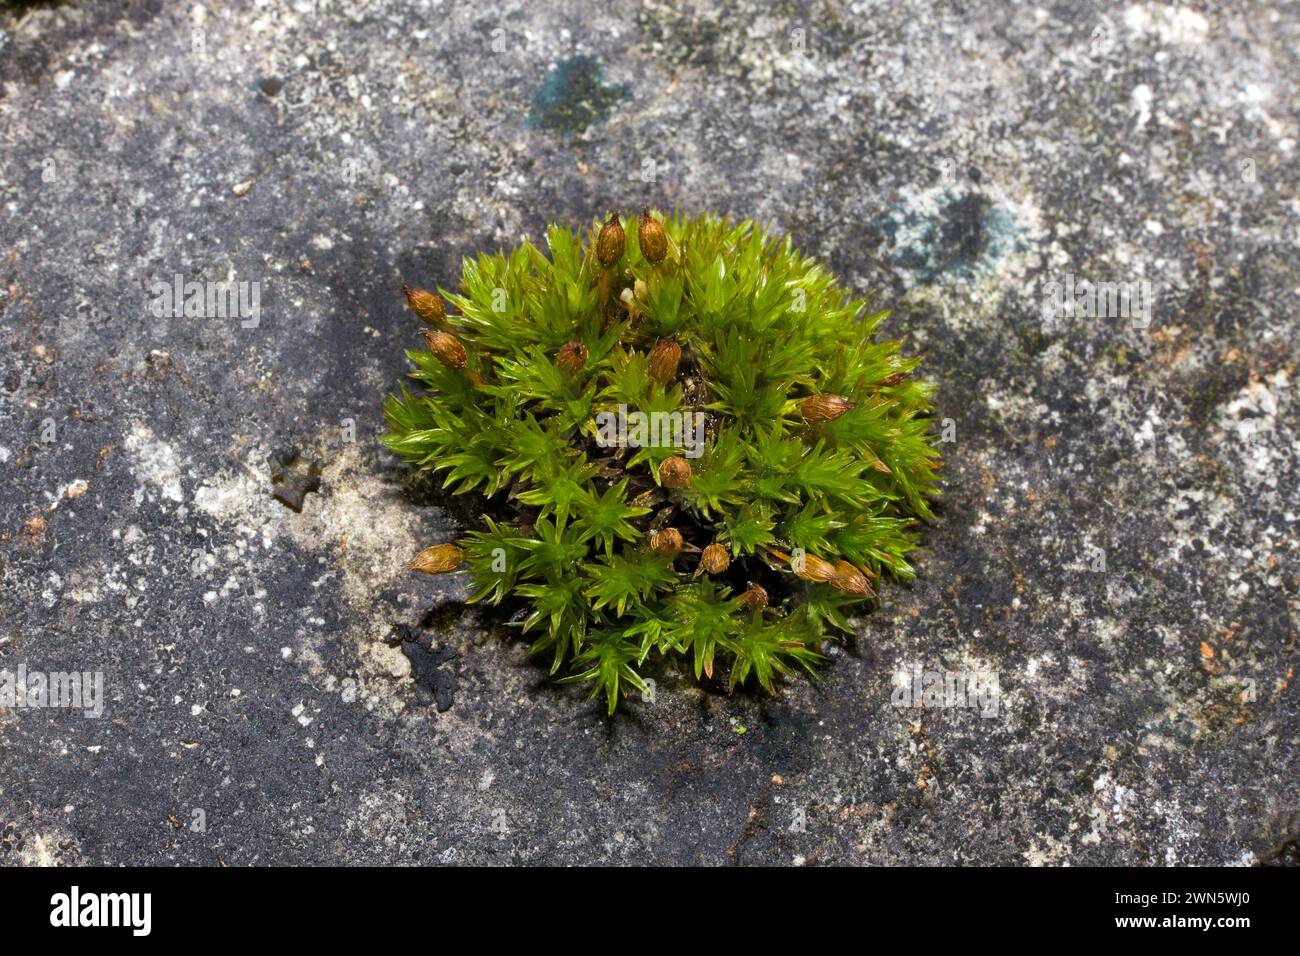 Orthotrichum anomalum (Anomalous Bristle-moss) is common on concrete, gravestones and wall tops. It is cosmopolitan in the Northern Hemisphere. Stock Photo